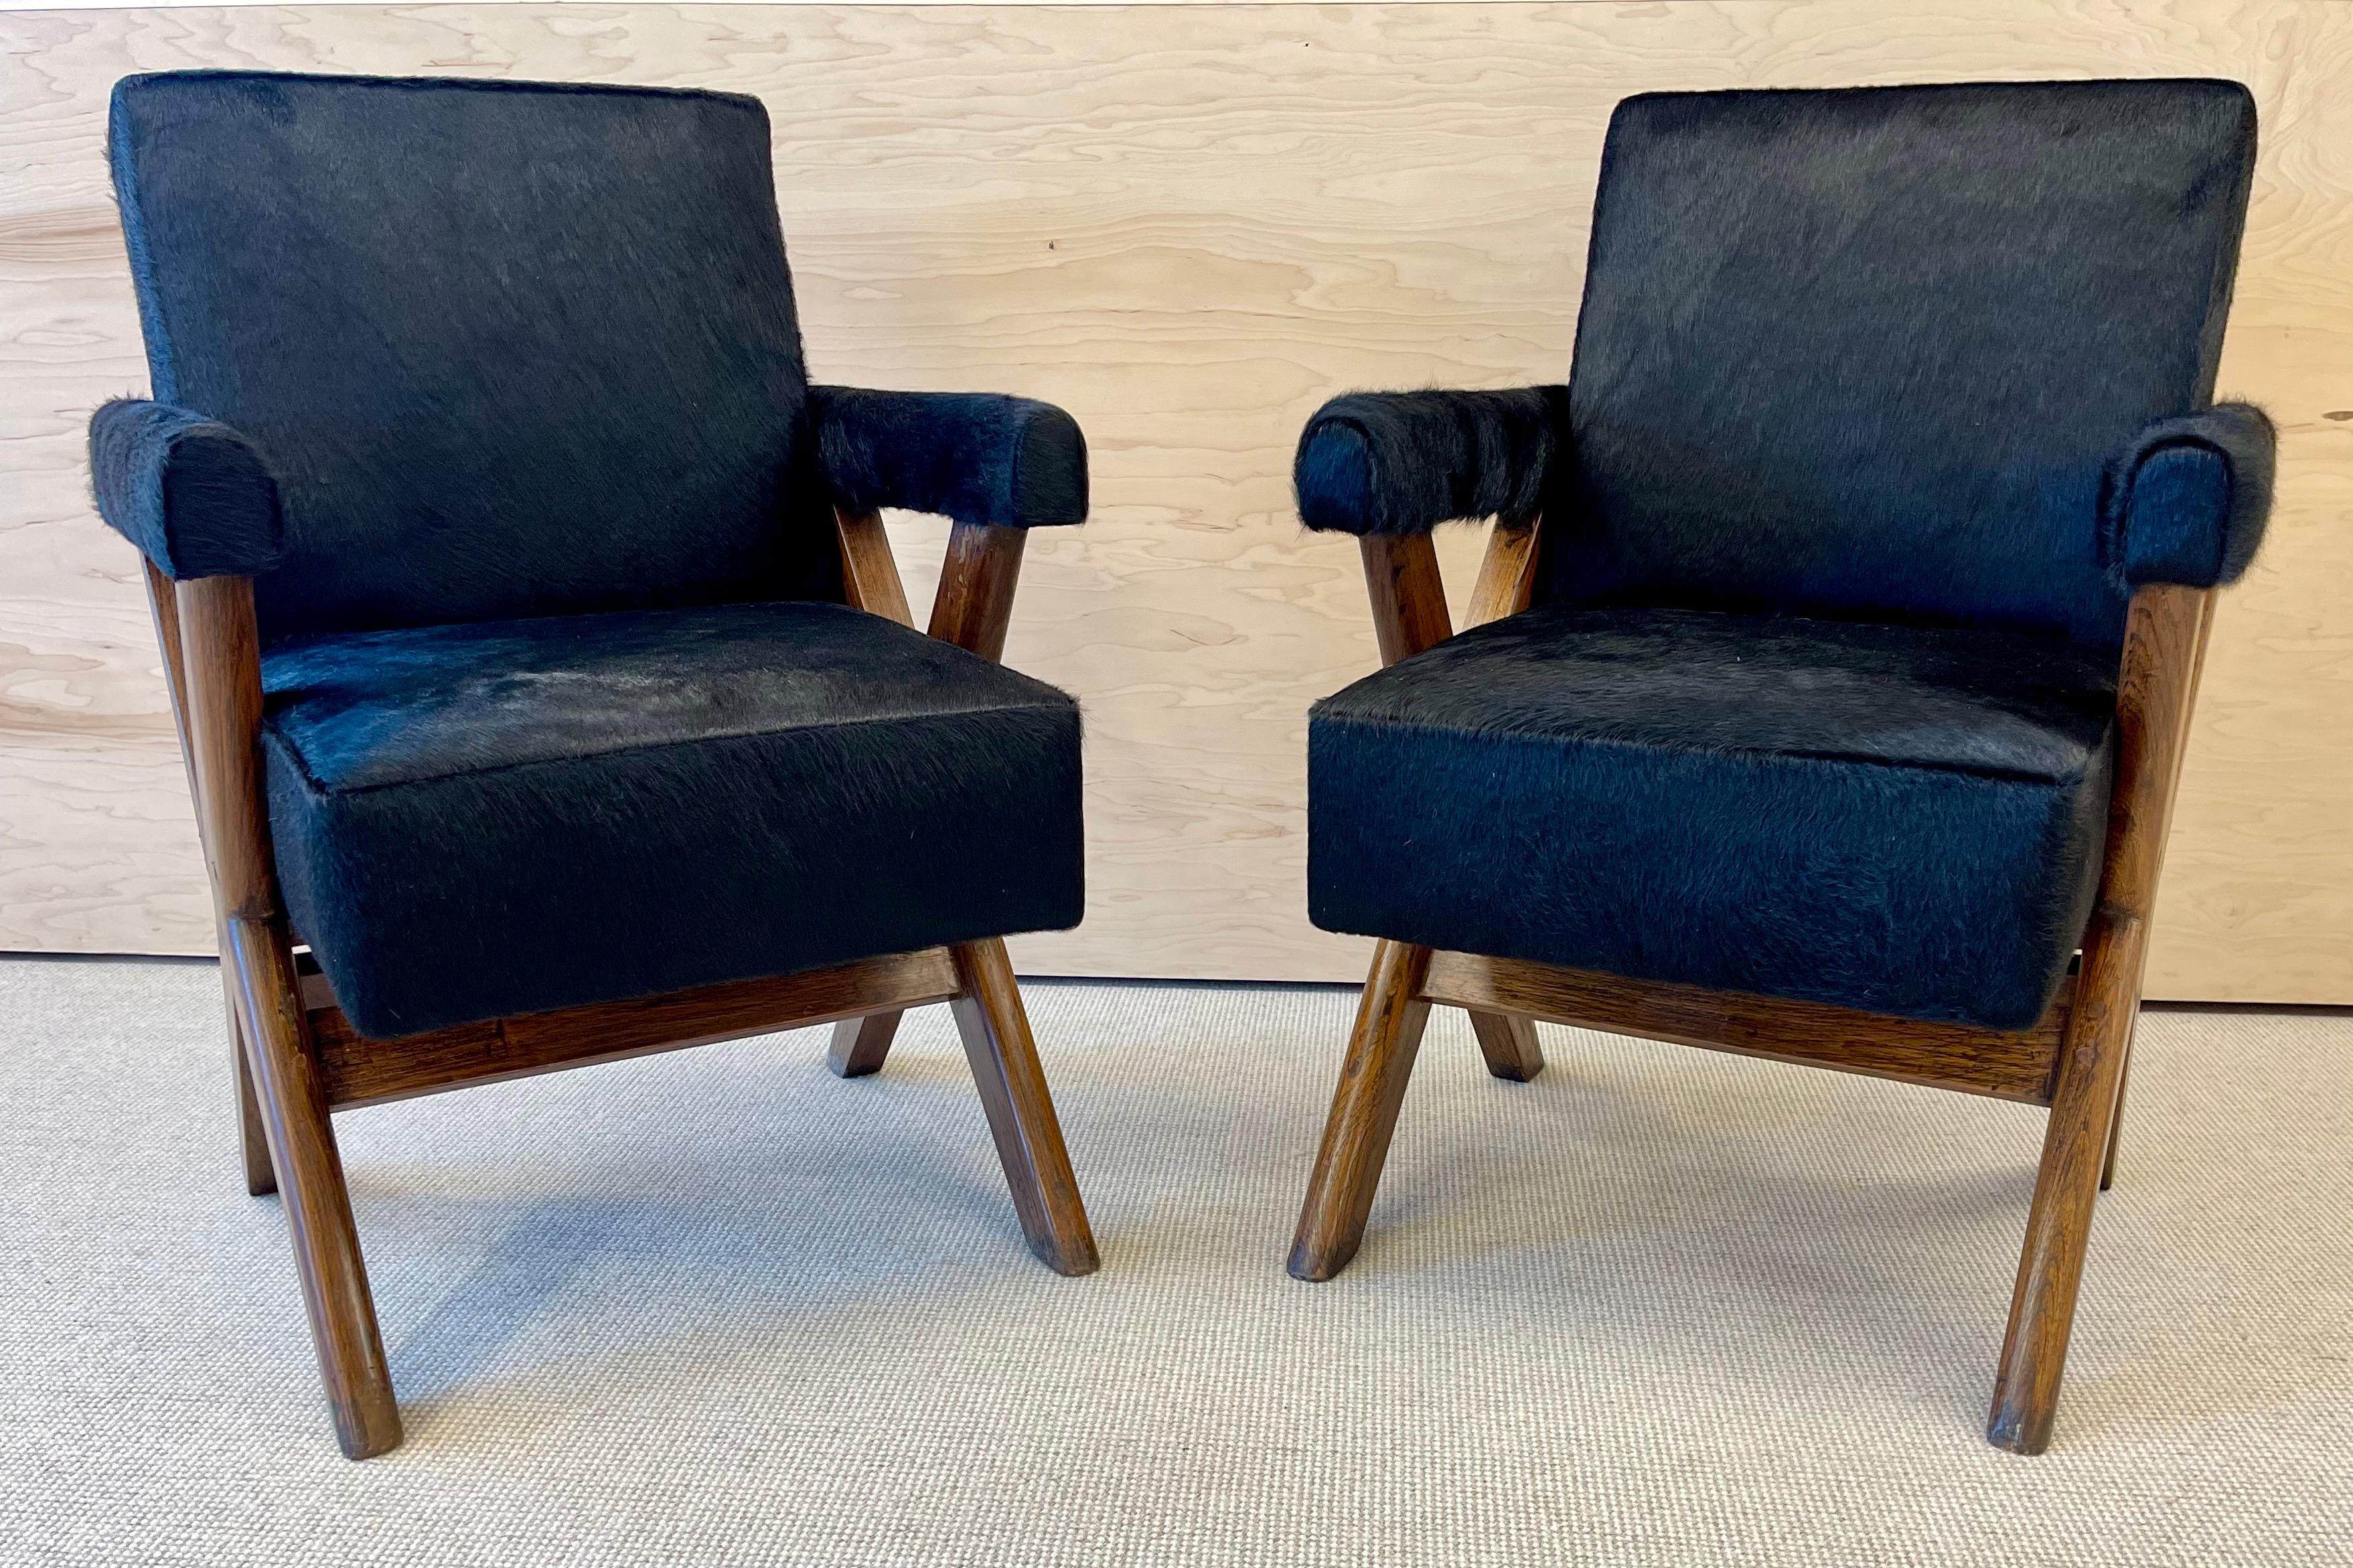 A rare pair of X-Leg ‘Committee’ chairs, c. 1960 attributed to Pierre Jeanneret
Model PJ-SI-50-A
Provenance: Chandigarh, India 1ggSX
 
Newly upholstered in a luxurious black cowhide - making these works extremely chic. New springs have been added in